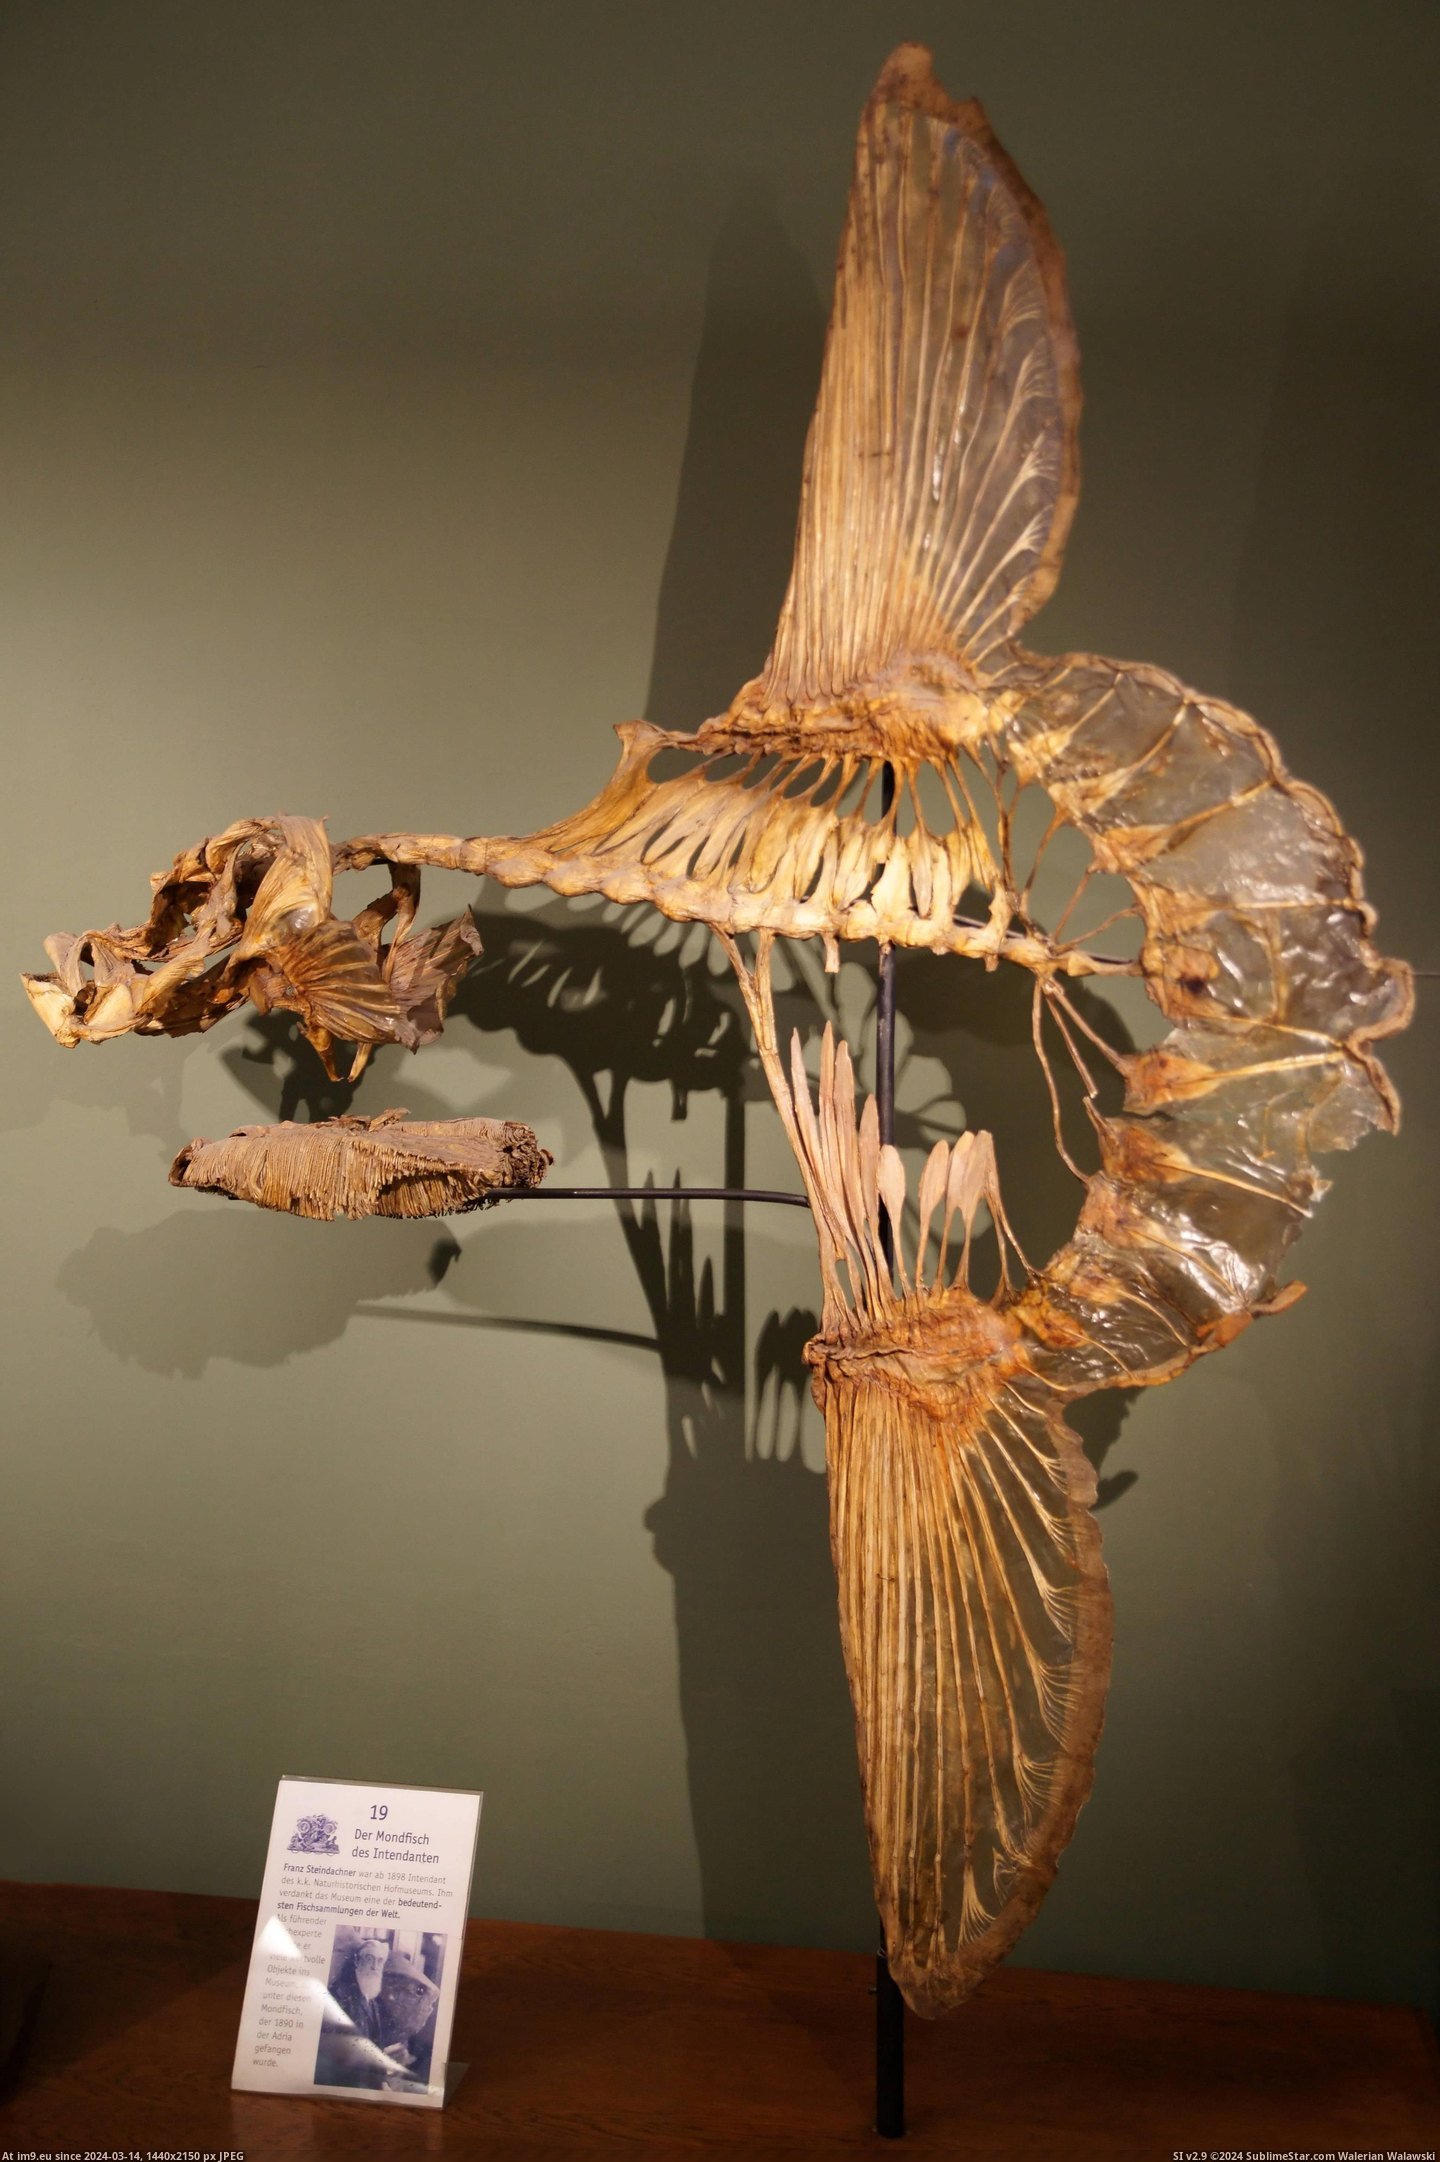 #Wtf #Ocean #Tail #Fully #Adults #Sunfish #Mola #Pounds #Grown #Reach #Skeleton [Wtf] This is the skeleton of a Mola Mola, or ocean sunfish. Fully grown adults can reach over 5000 pounds, and have no tail. Th Pic. (Image of album My r/WTF favs))